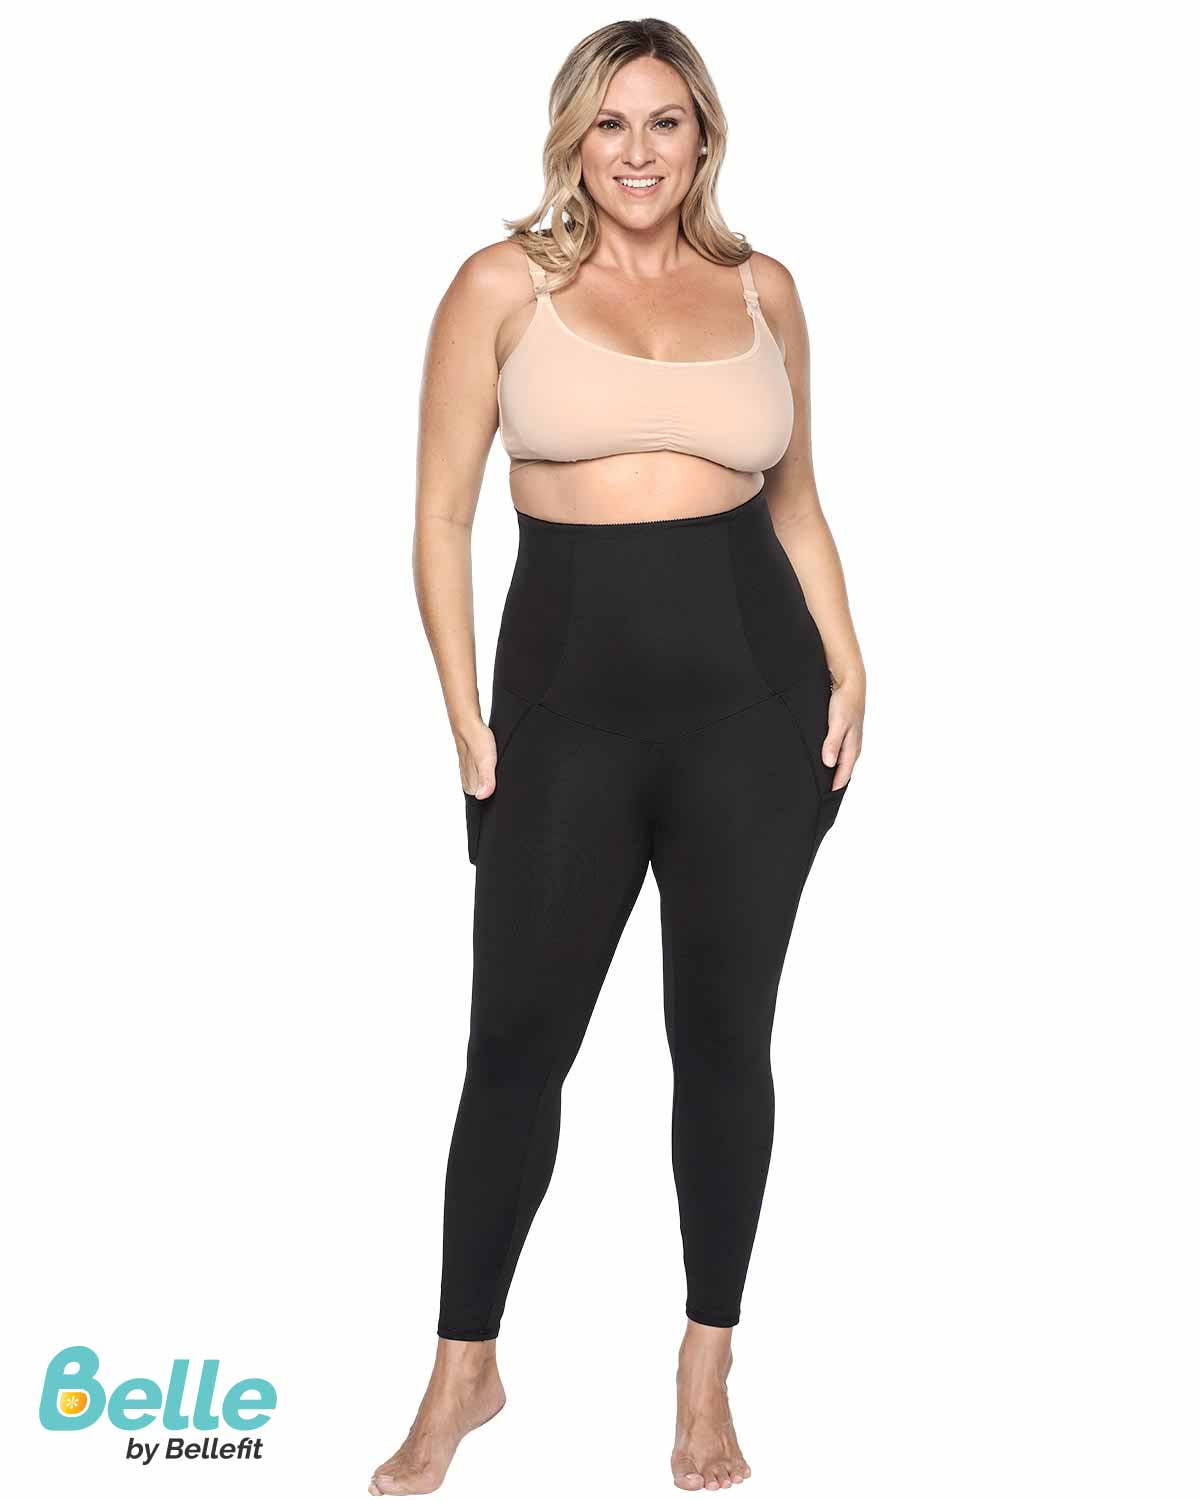 THE CORE SUPPORT LEGGINGS